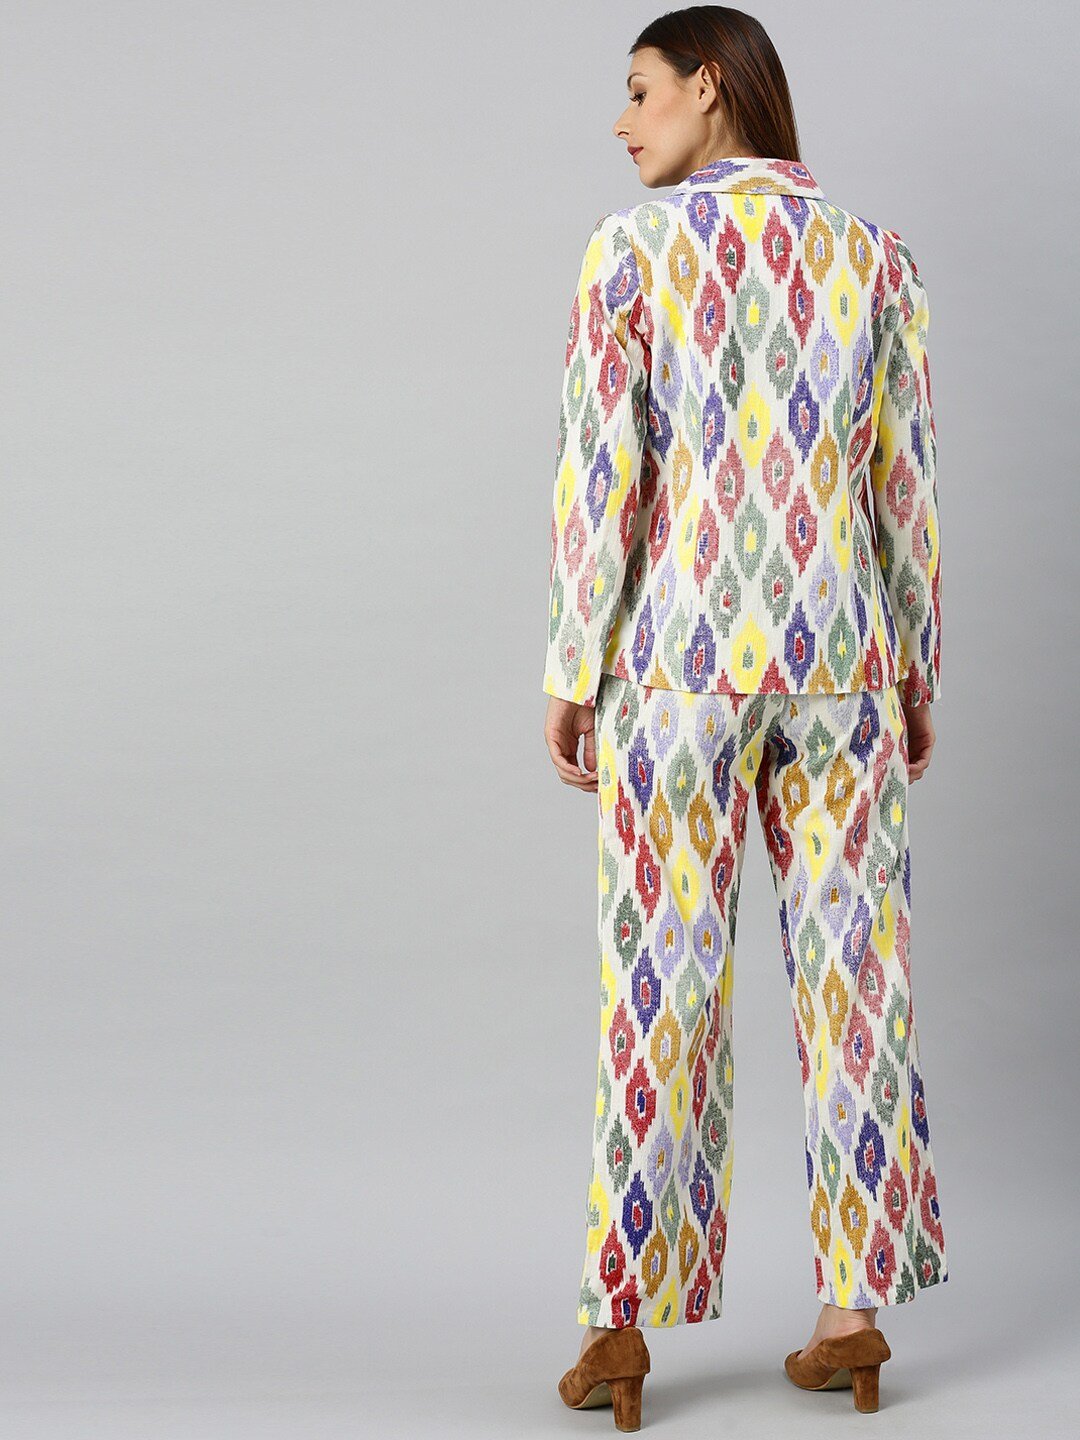 Women's Printed Coat with Trousers - AKS